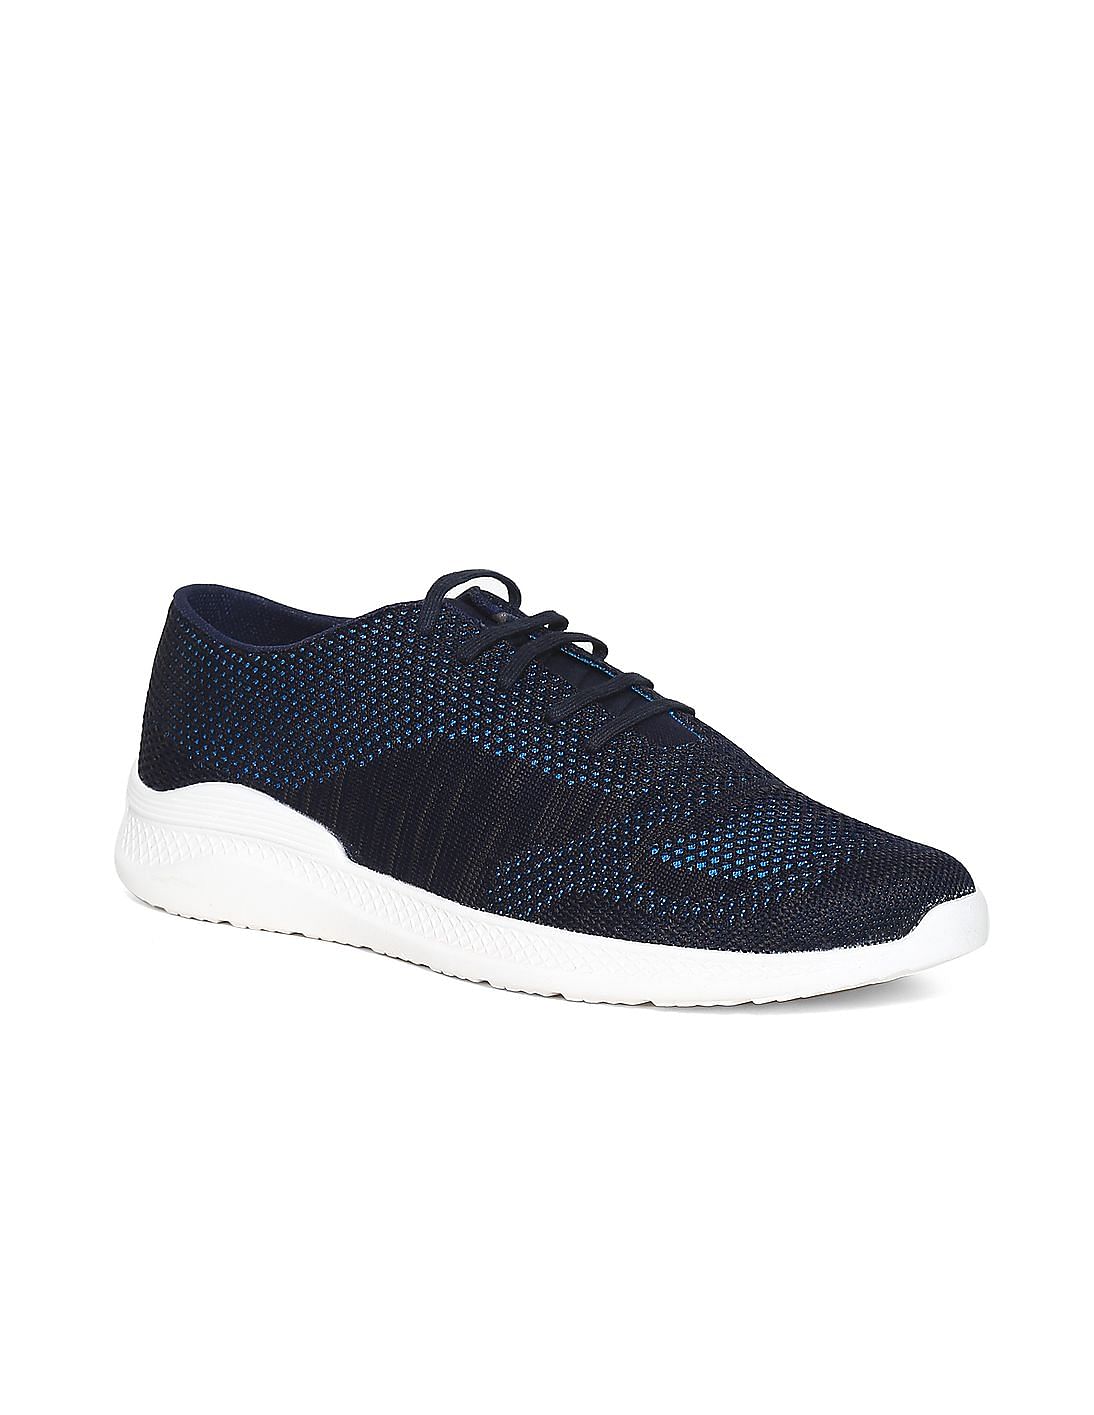 Buy Ruggers Blue Knit Upper Contrast Sole Sneakers - NNNOW.com